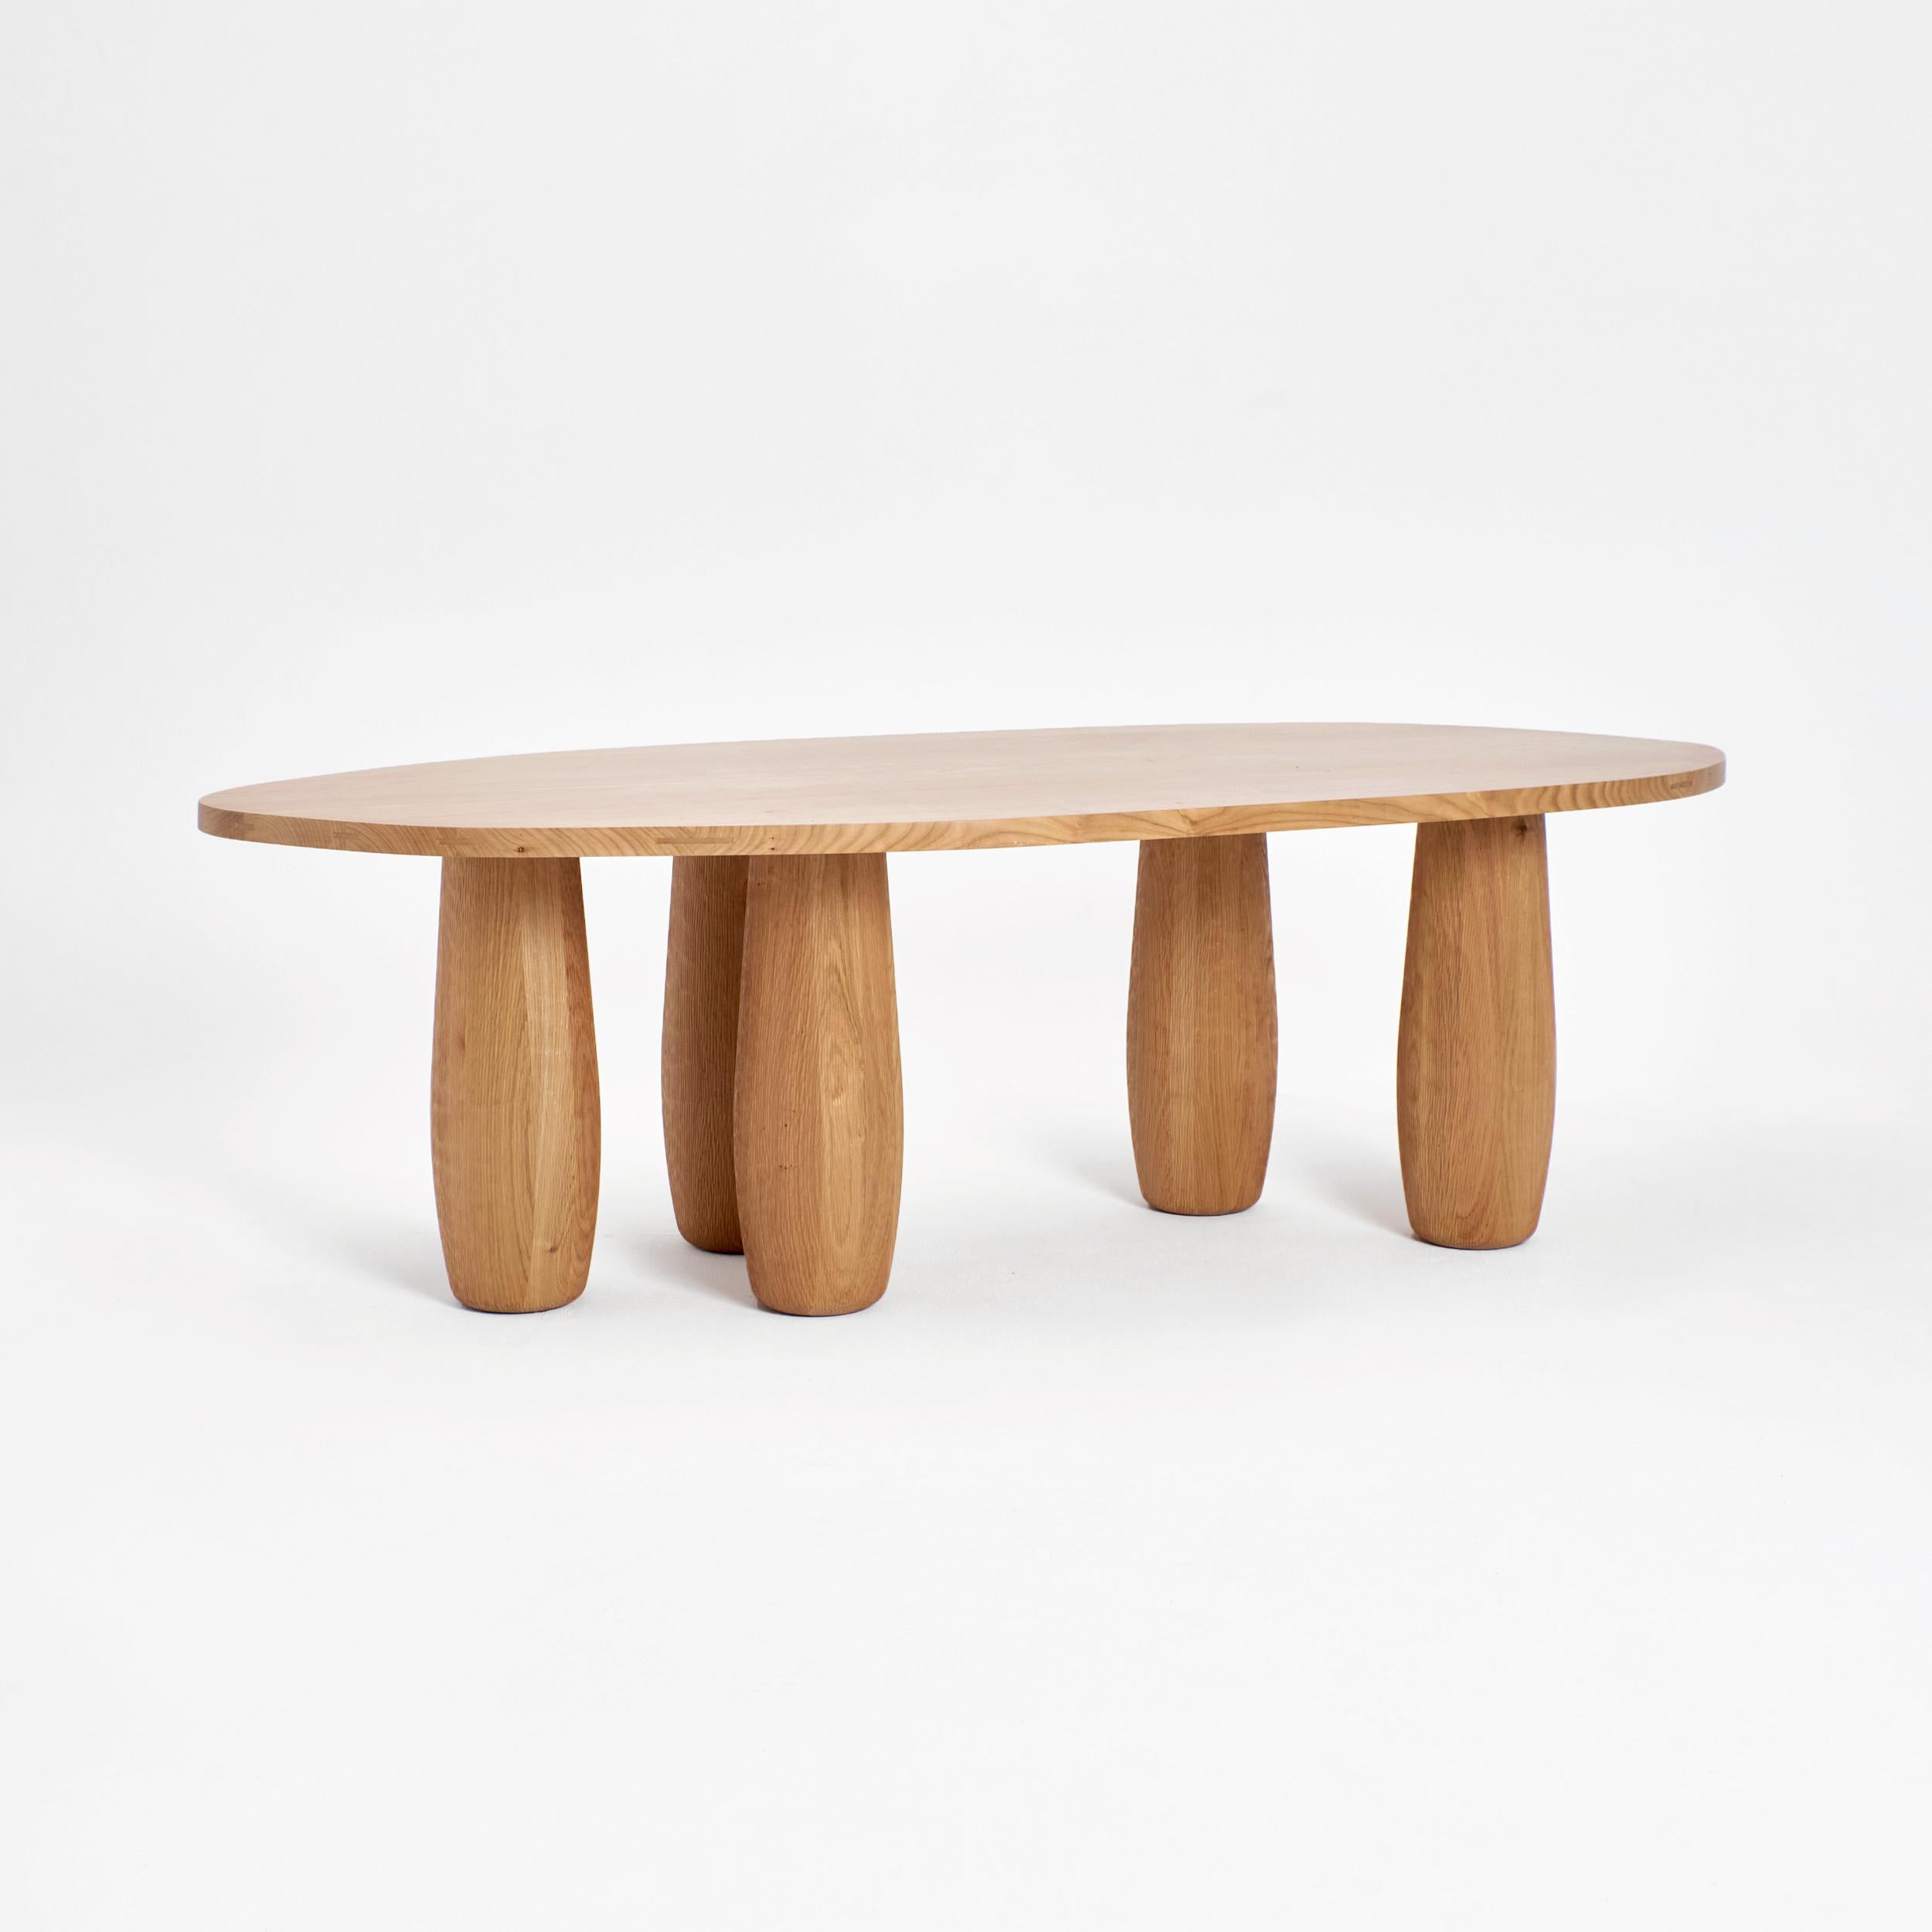 A table dining table by Project 213A
Dimensions: D 117 x W 214.5 x H 76.5 cm
Materials: Cherry wood. 

An asymmetric table top standing on five oval legs. Each segment carved from an individual piece of cherry wood to showcase the natural flow and